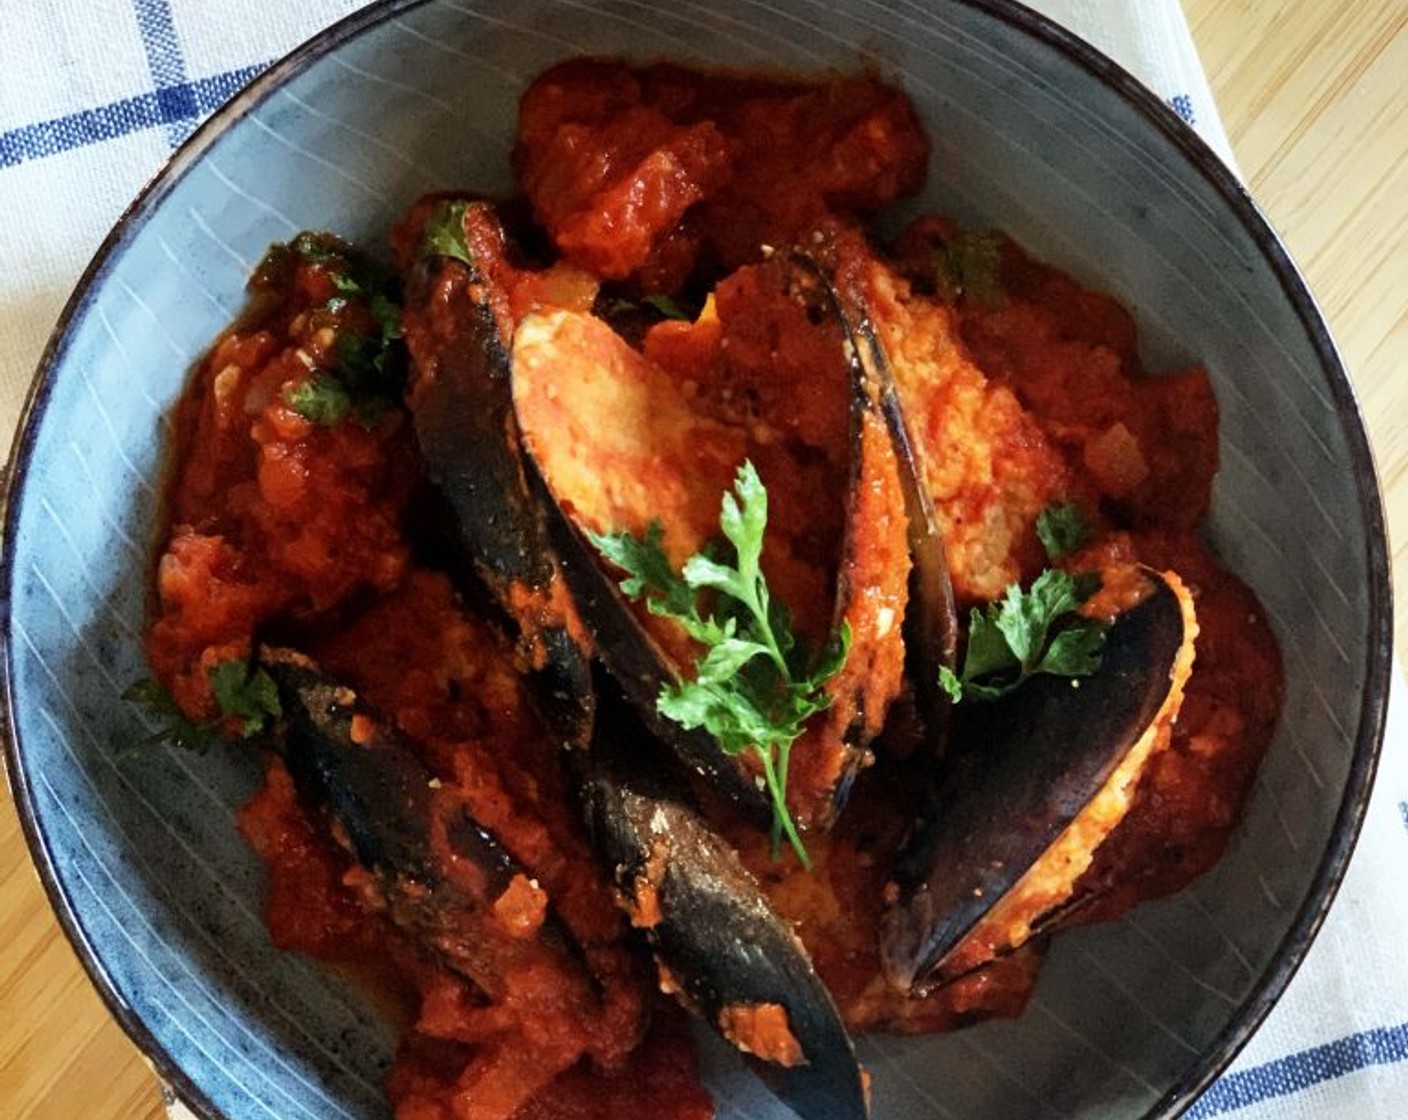 Stuffed Mussels in Tomato Sauce